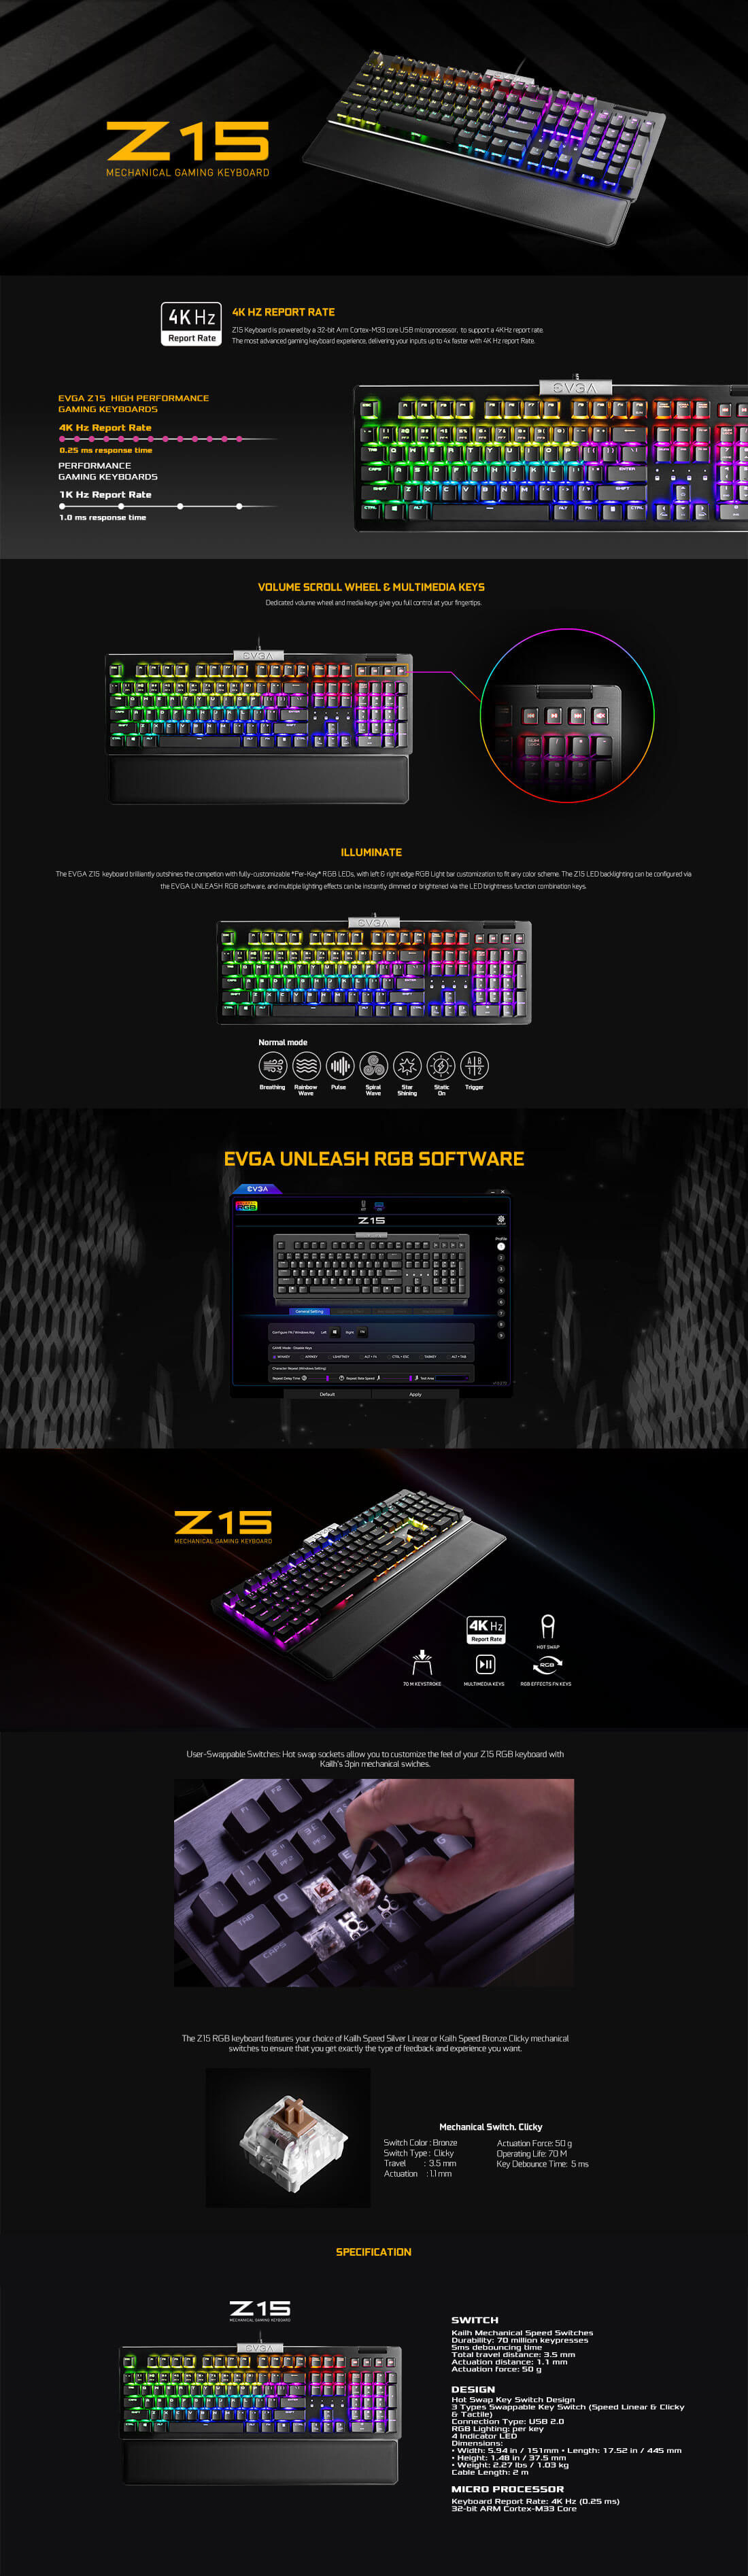 EVGA - Products - EVGA Z15 RGB Mechanical Gaming Keyboard (Clicky